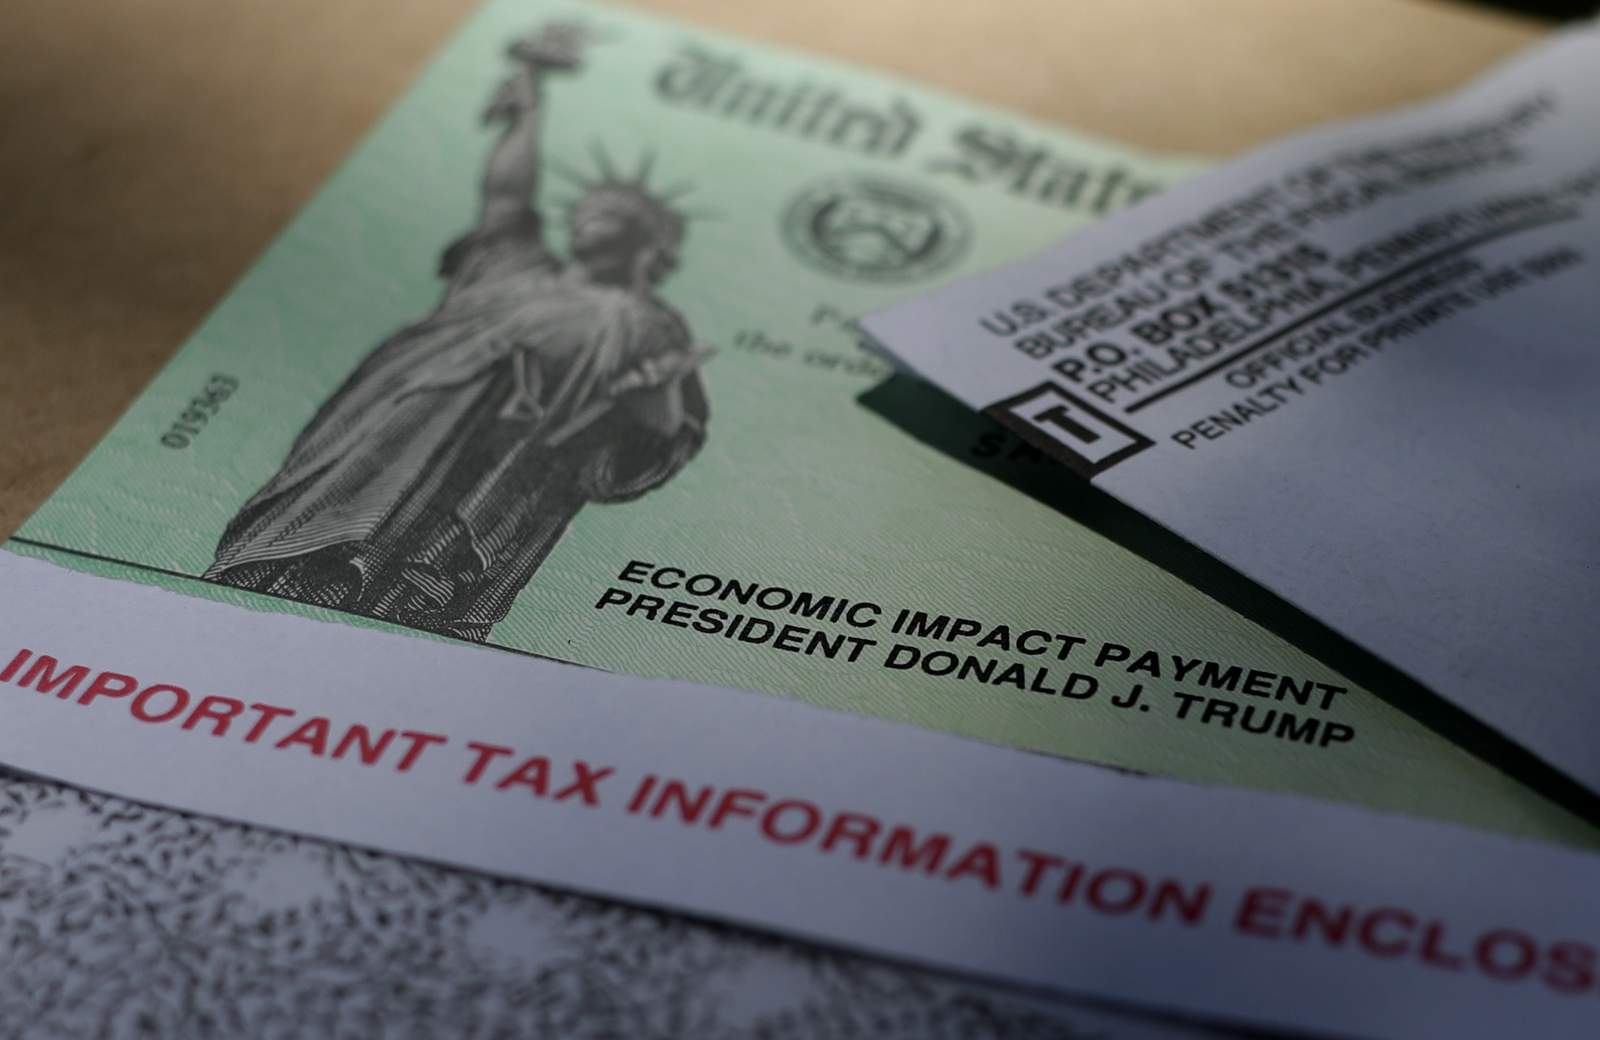 $1,400 stimulus checks: When to expect payments and who’s eligible?